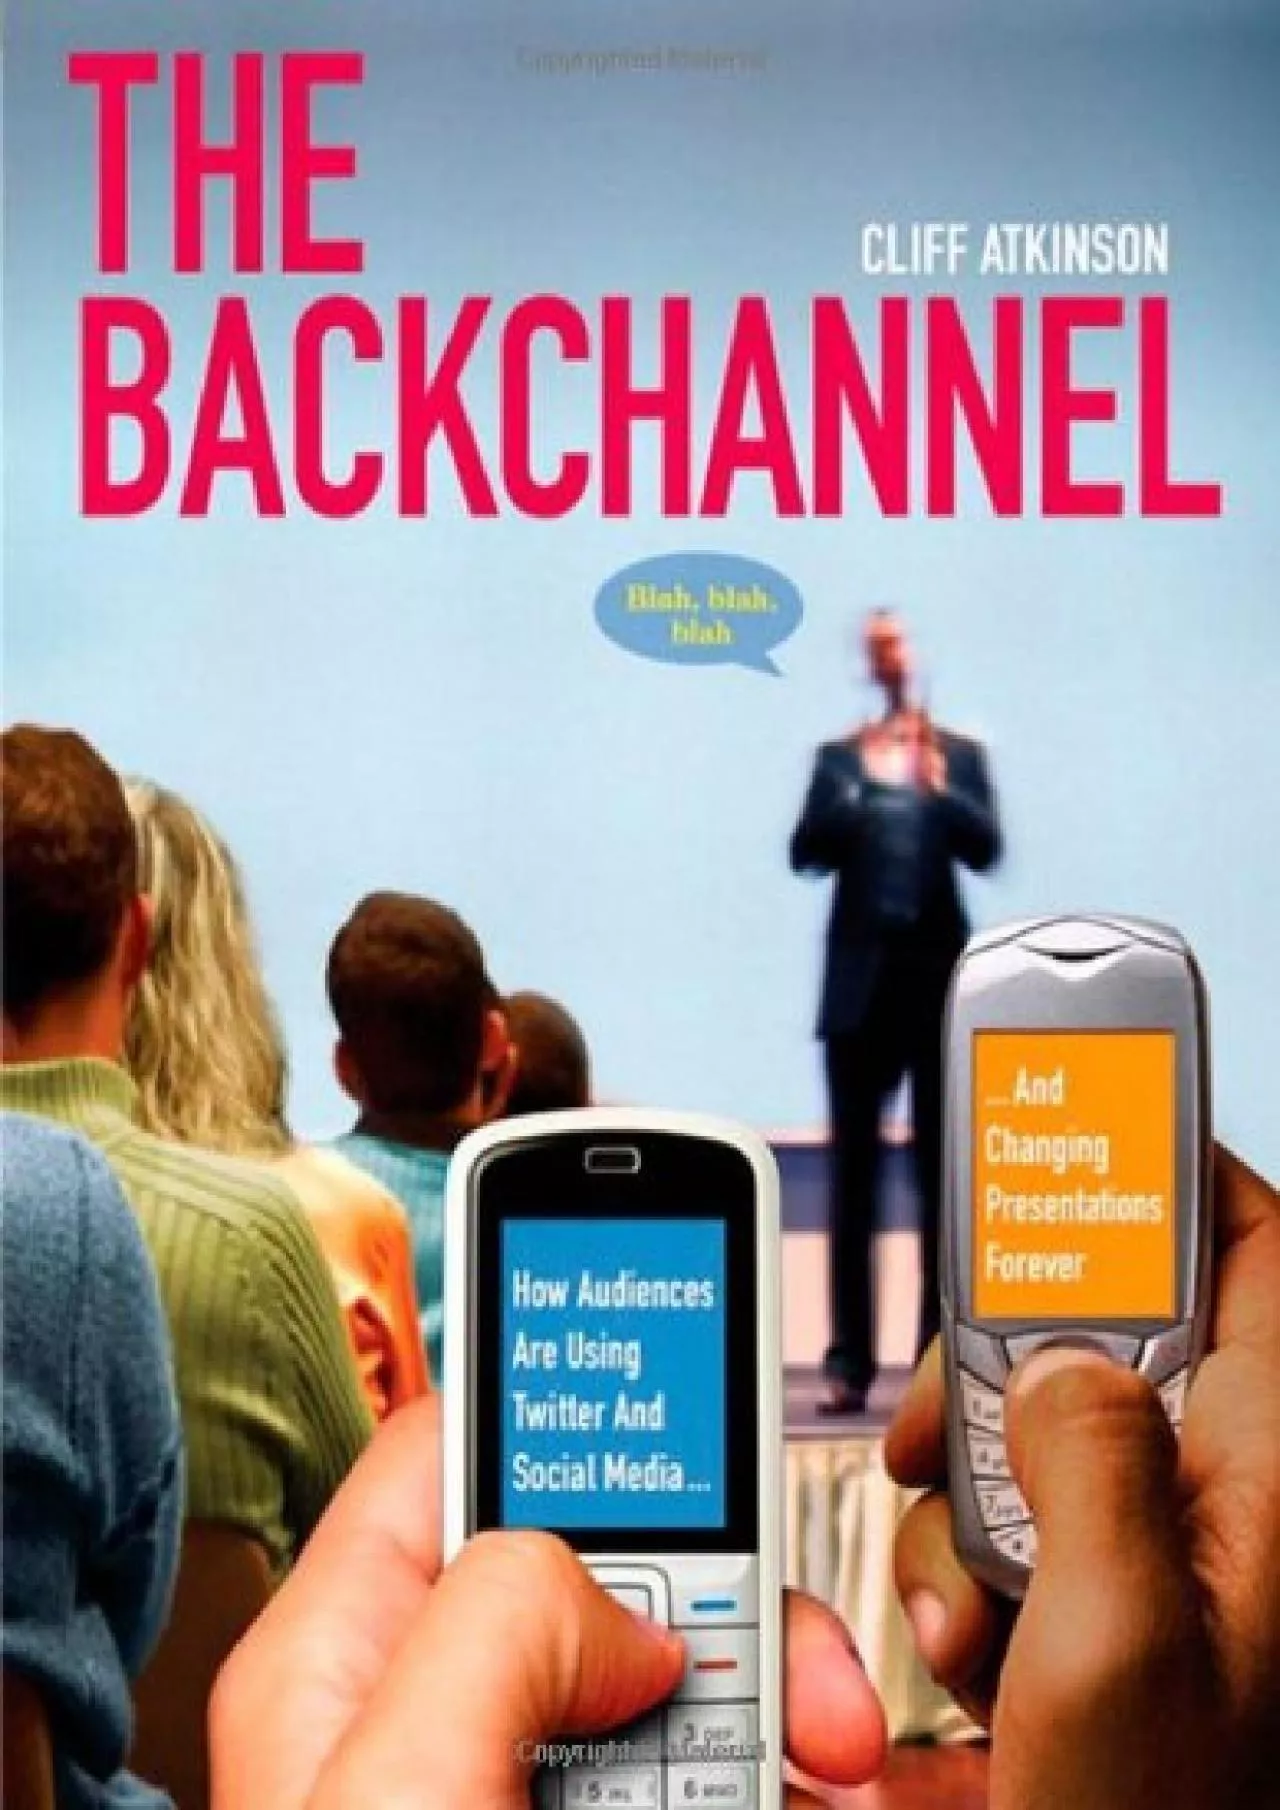 The Backchannel: How Audiences Are Using Twitter and Social Media and Changing Presentations